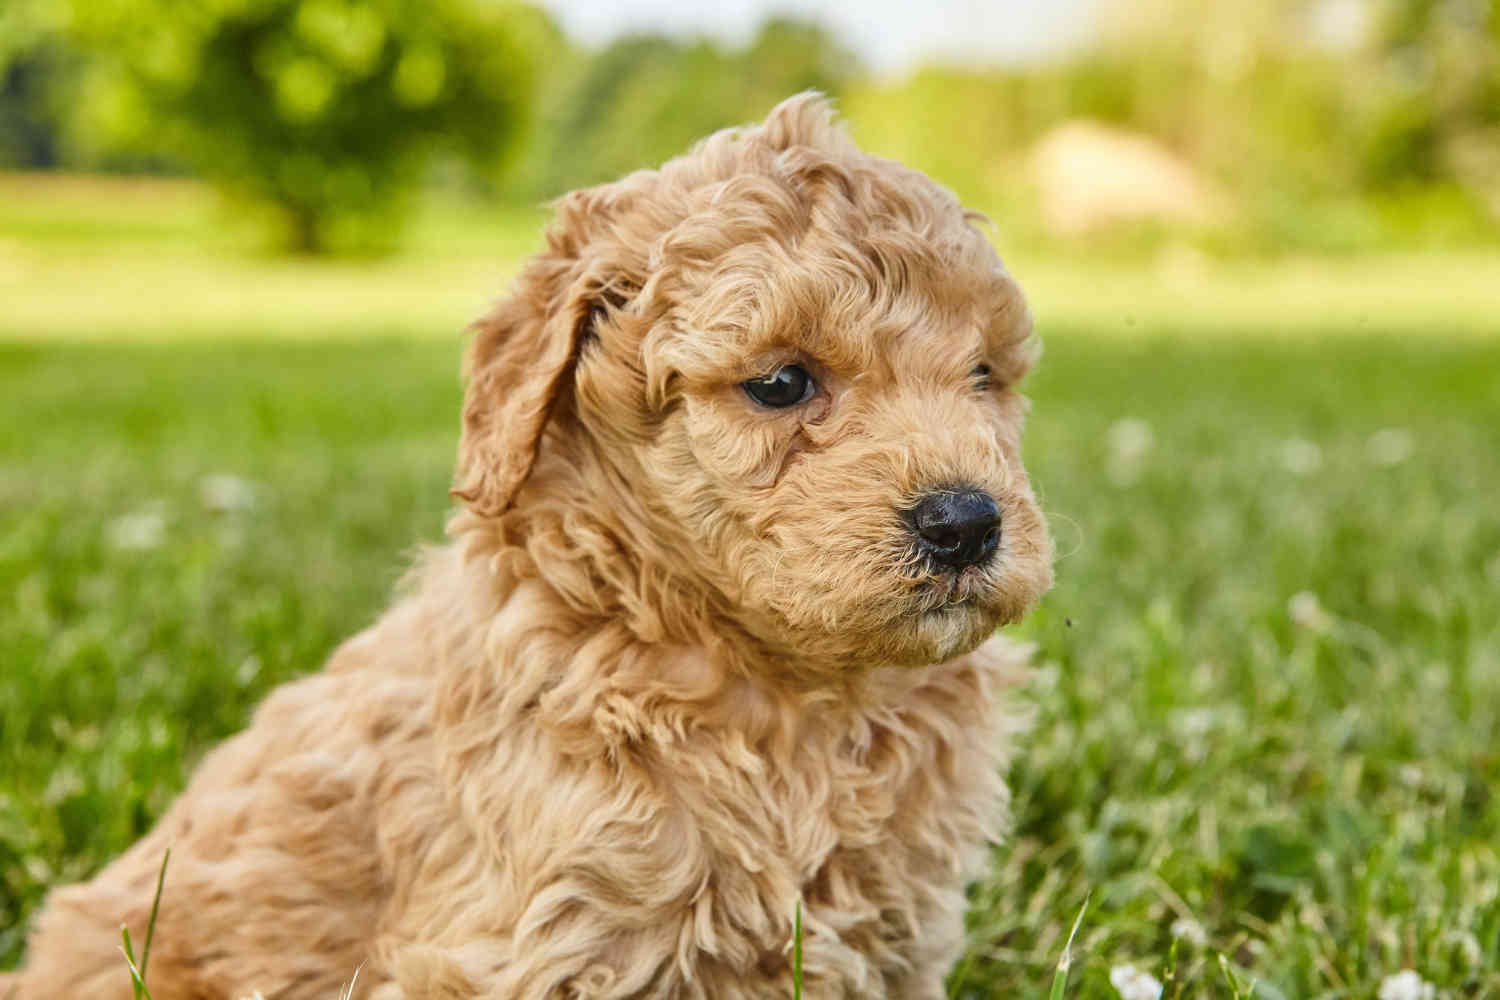 Goldendoodle Health: How Often Should You Visit a Veterinarian for Checkups?